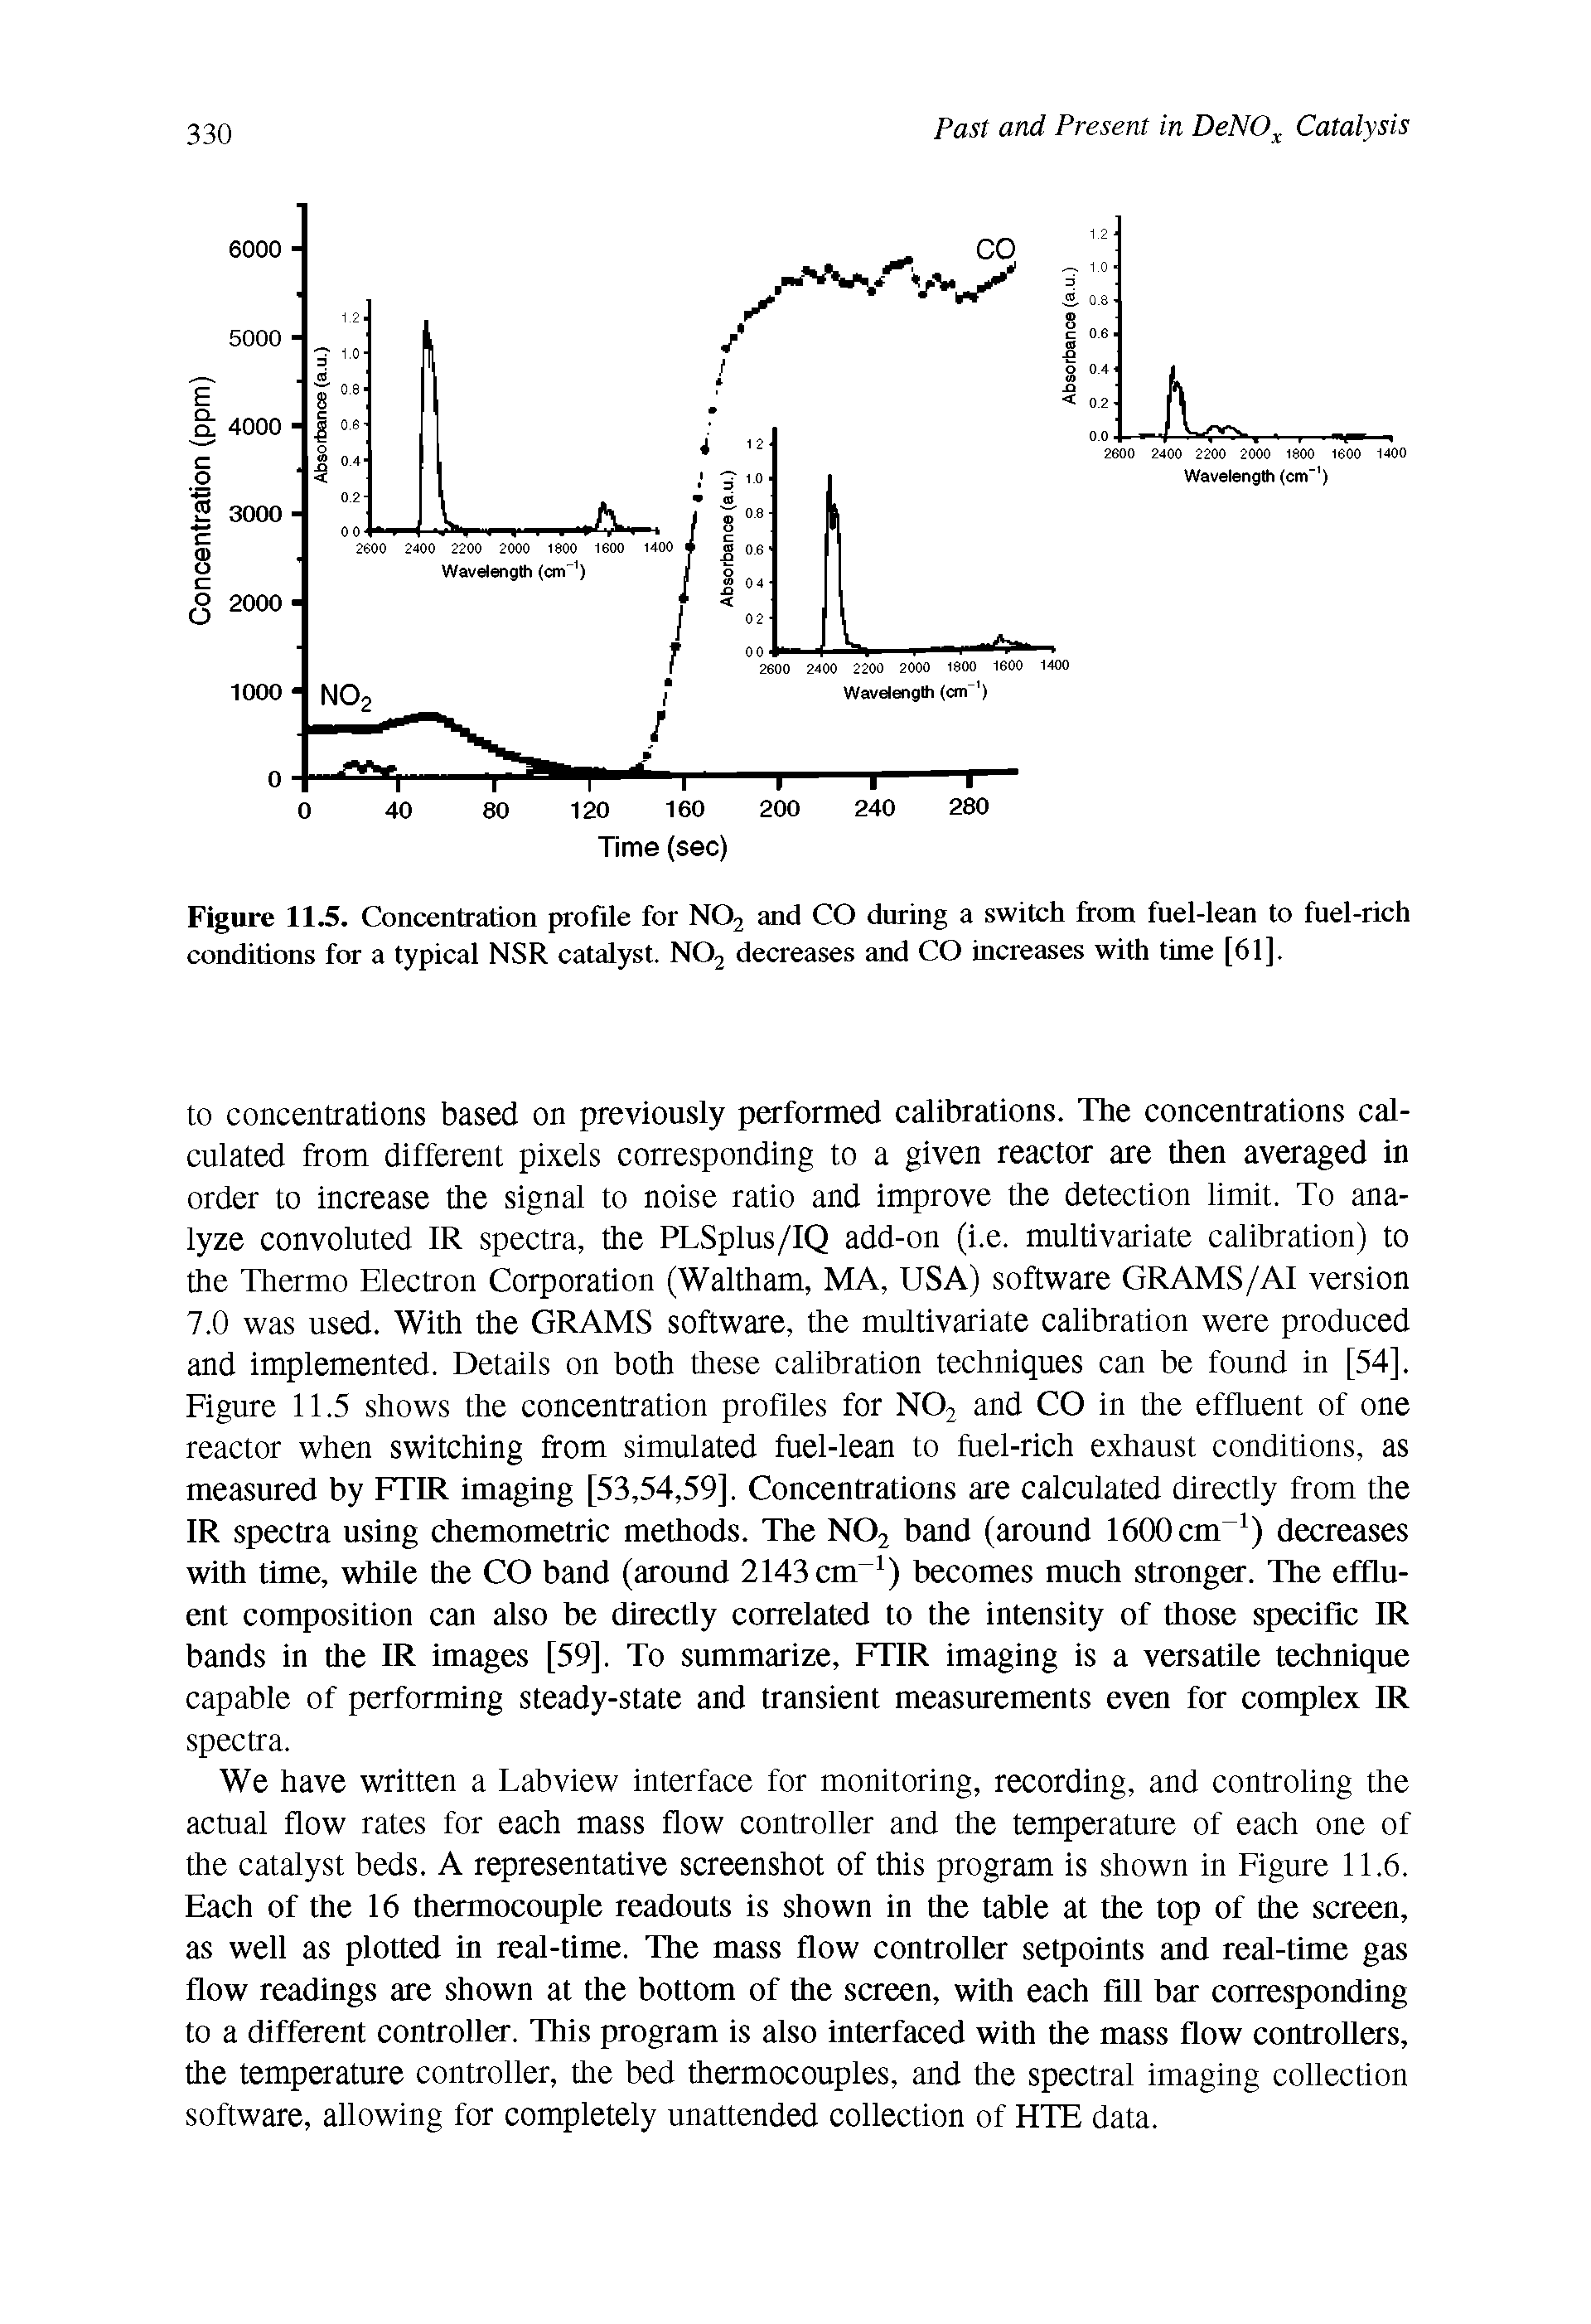 Figure 11.5. Concentration profile for N02 and CO during a switch from fuel-lean to fuel-rich conditions for a typical NSR catalyst. N02 decreases and CO increases with time [61].